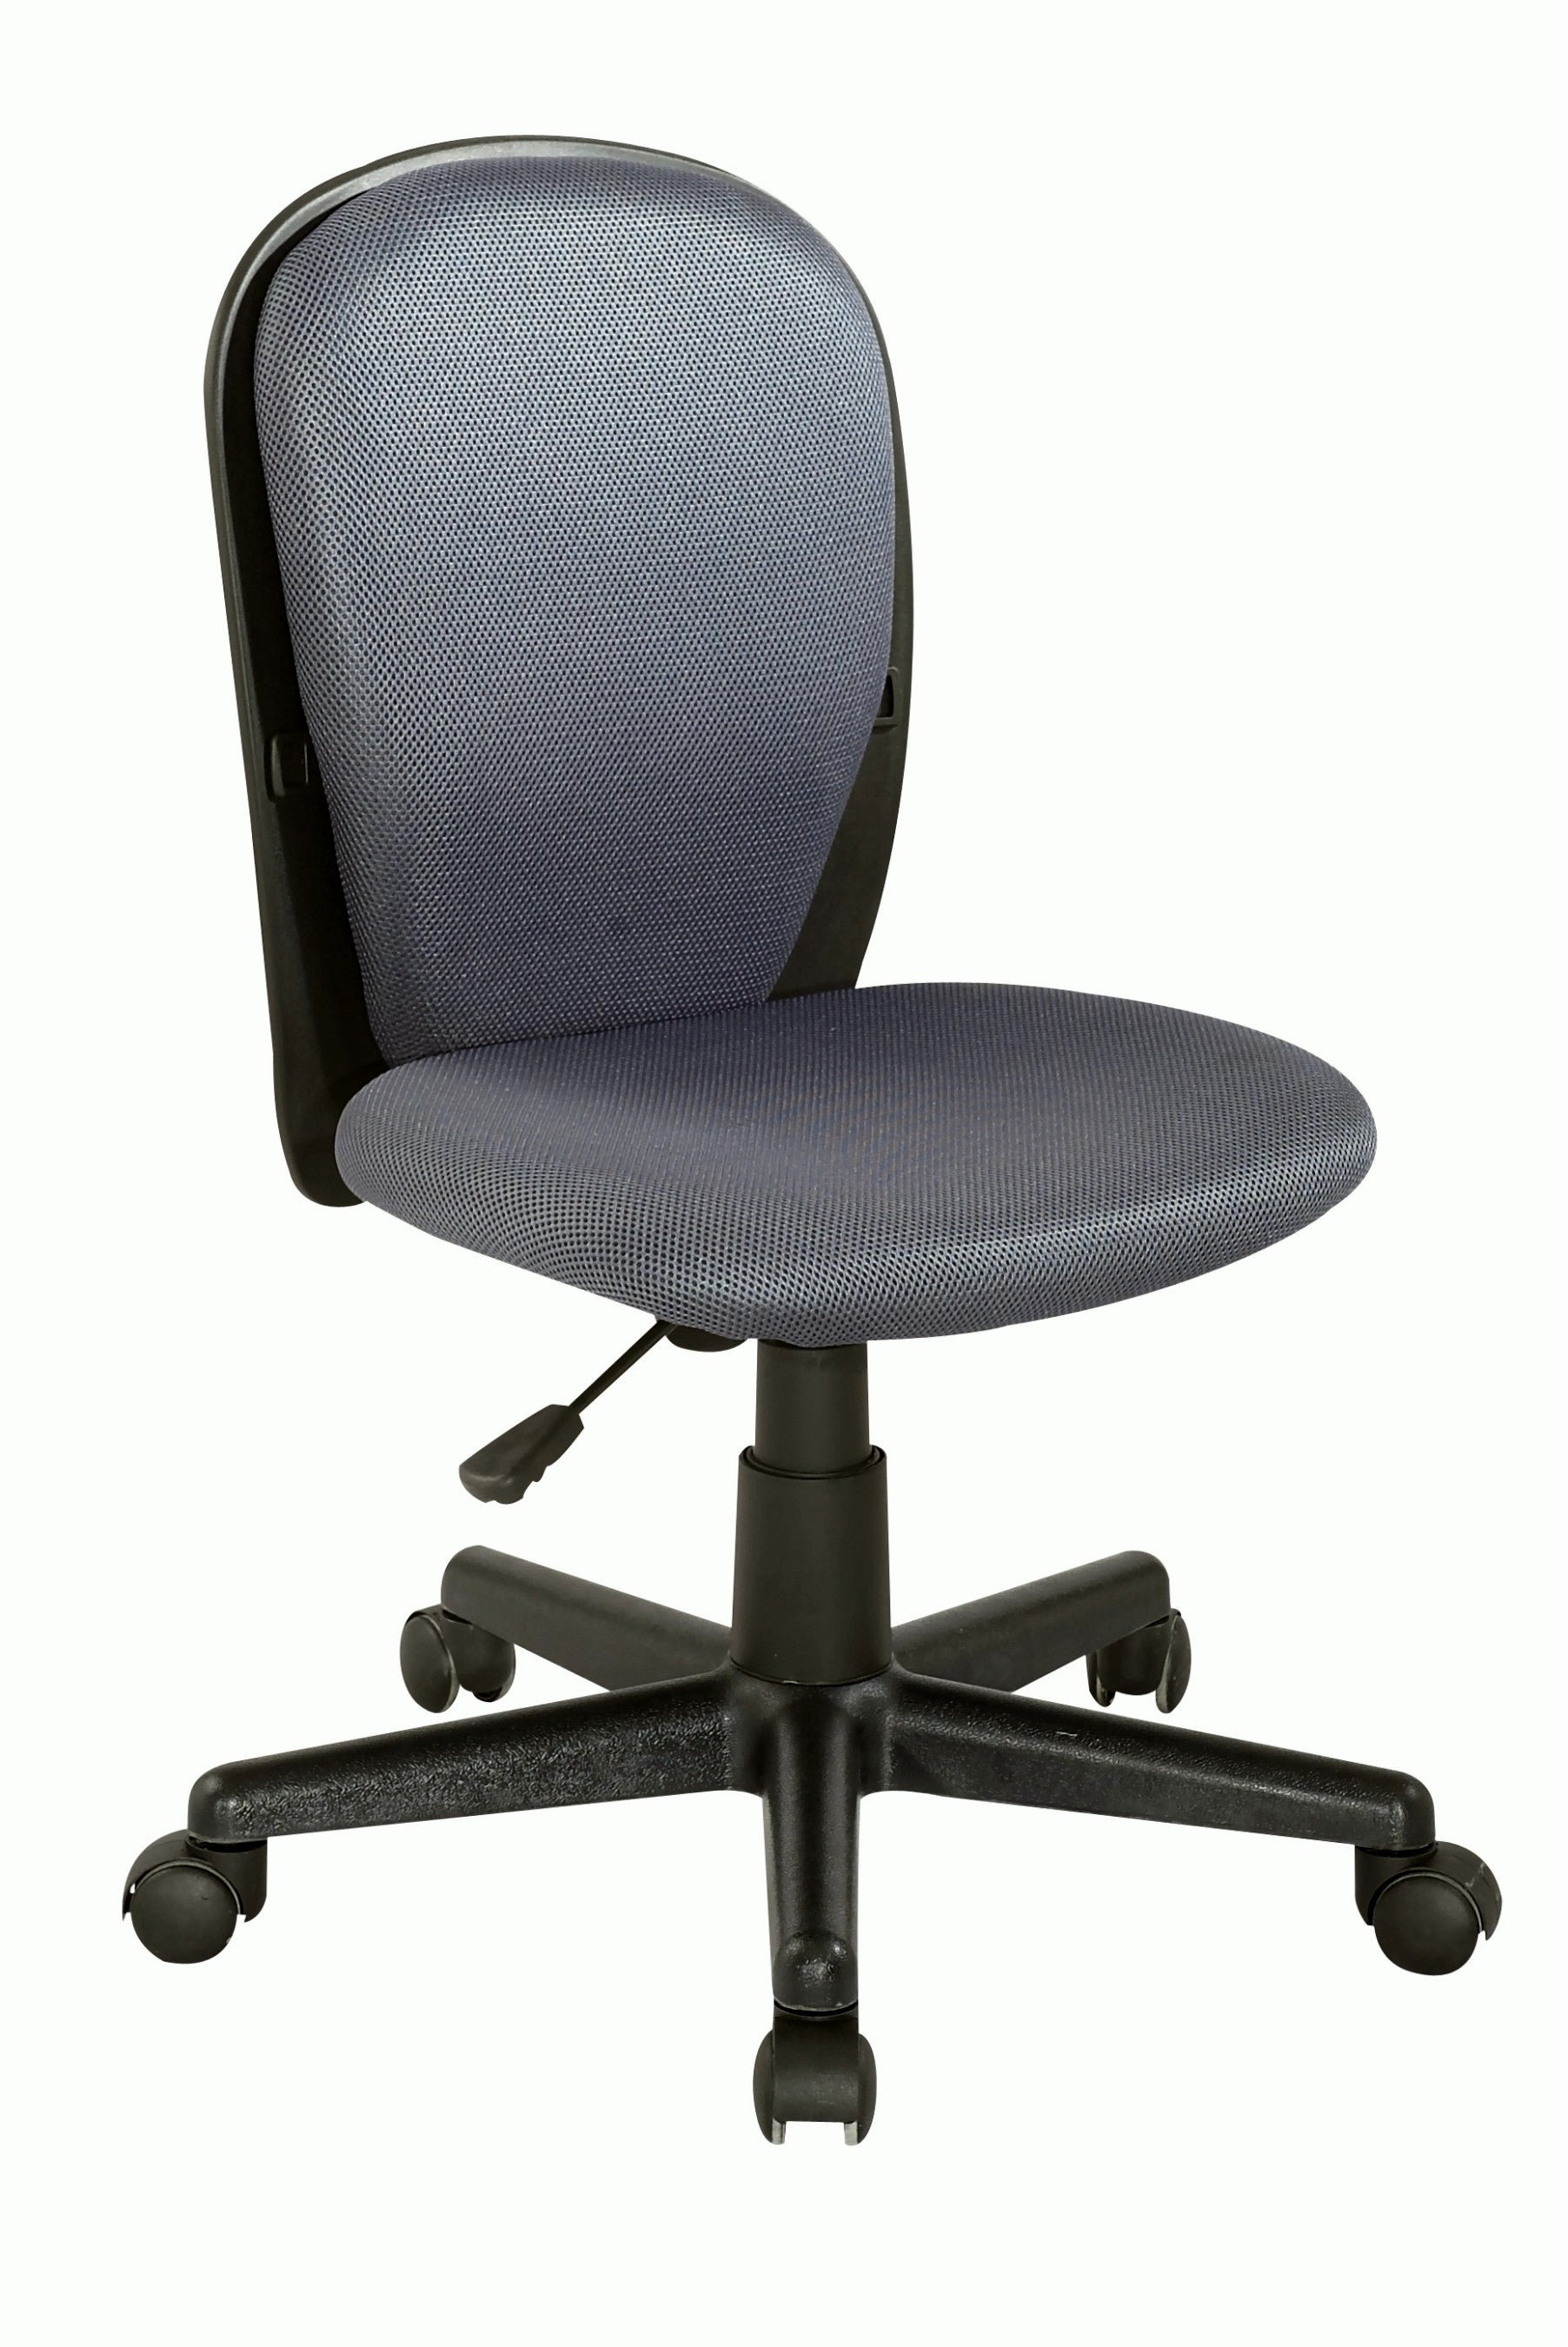 Chintaly 4245-cch-gry Fabric Back And Seat Youth Desk Chair